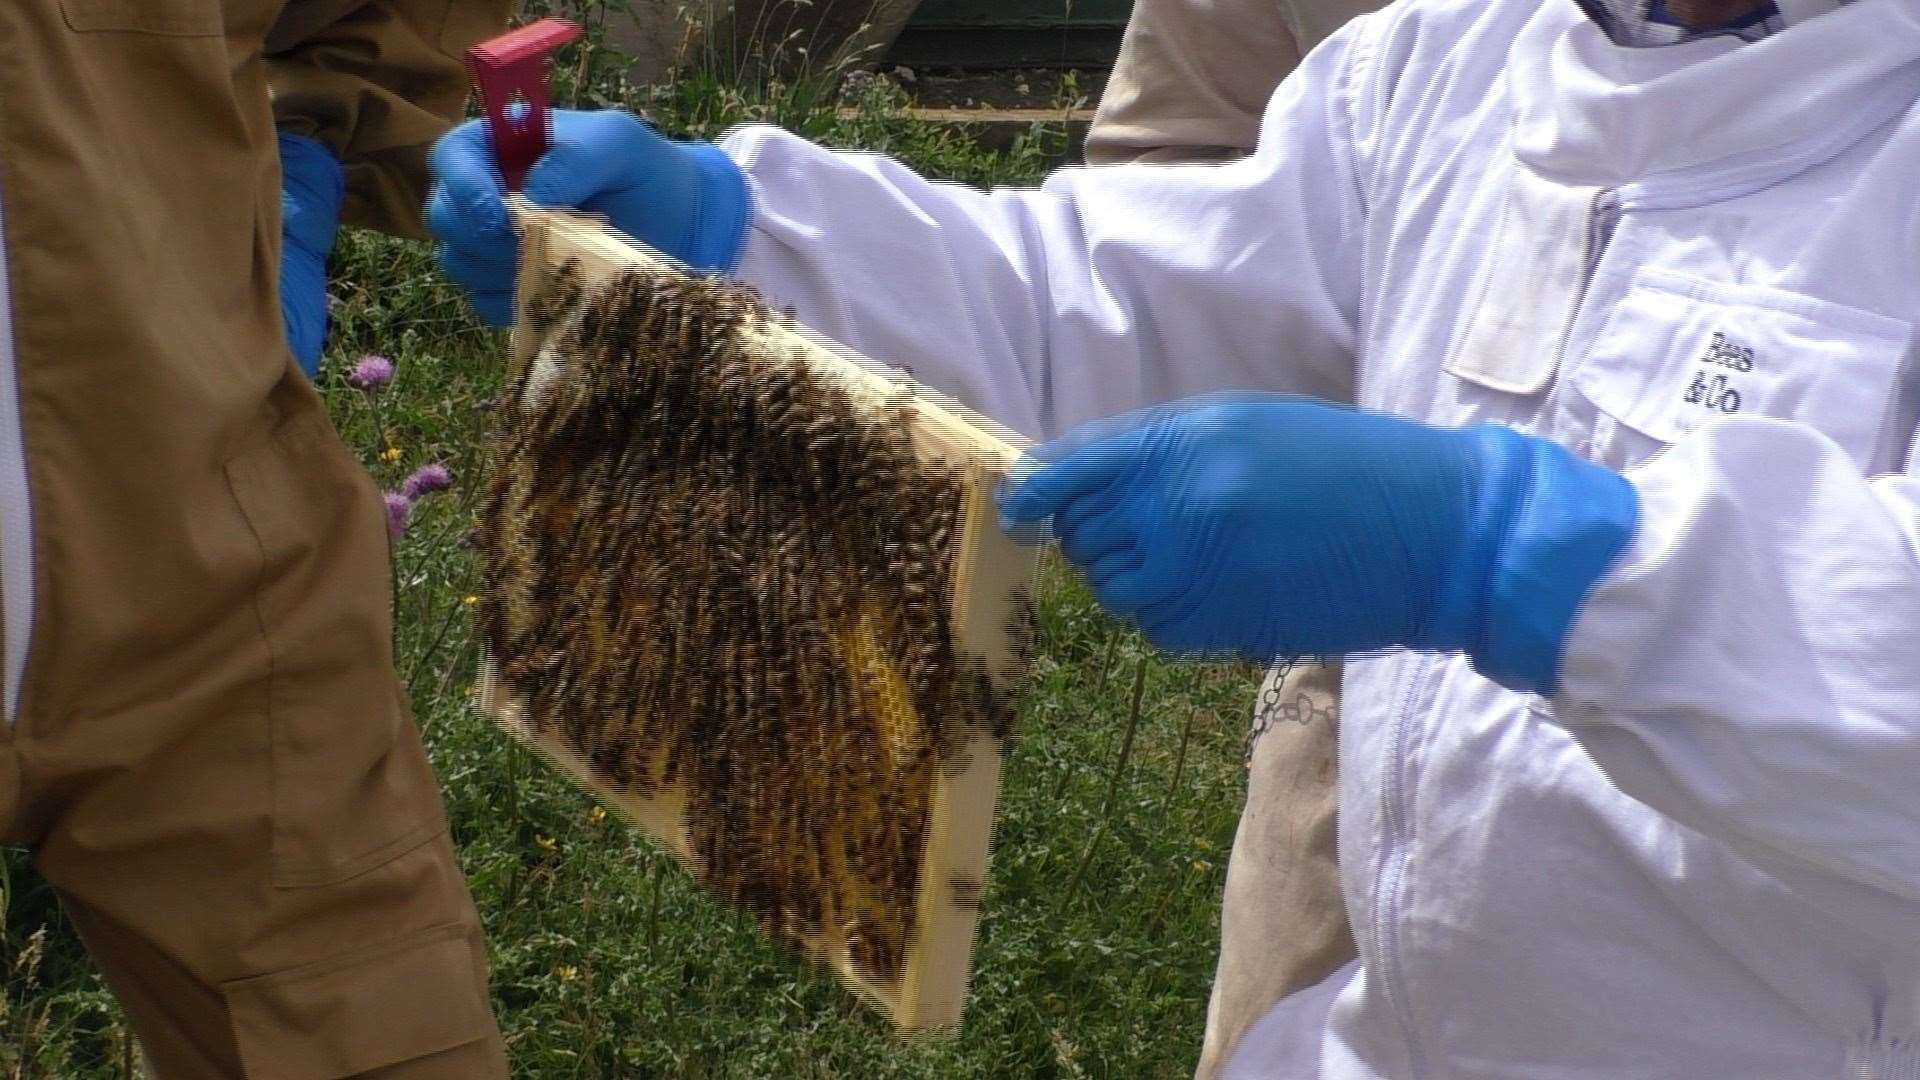 They shake the bees to inspect the hives